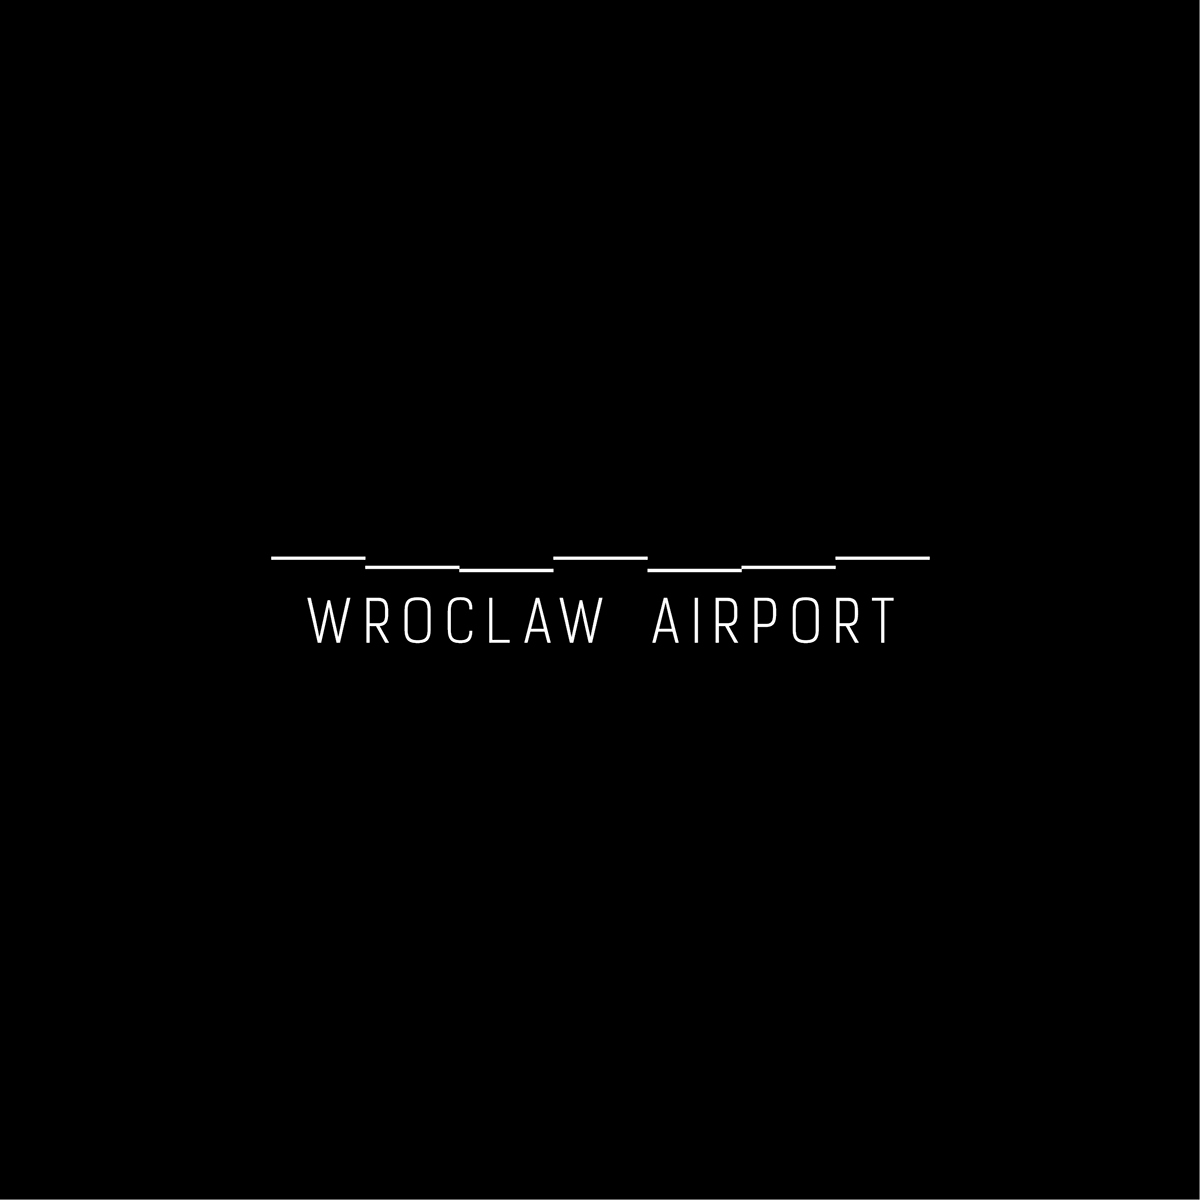 logo WROCLAW AIRPORT wroclaw terminal Aircraft aviation transportation Airlines